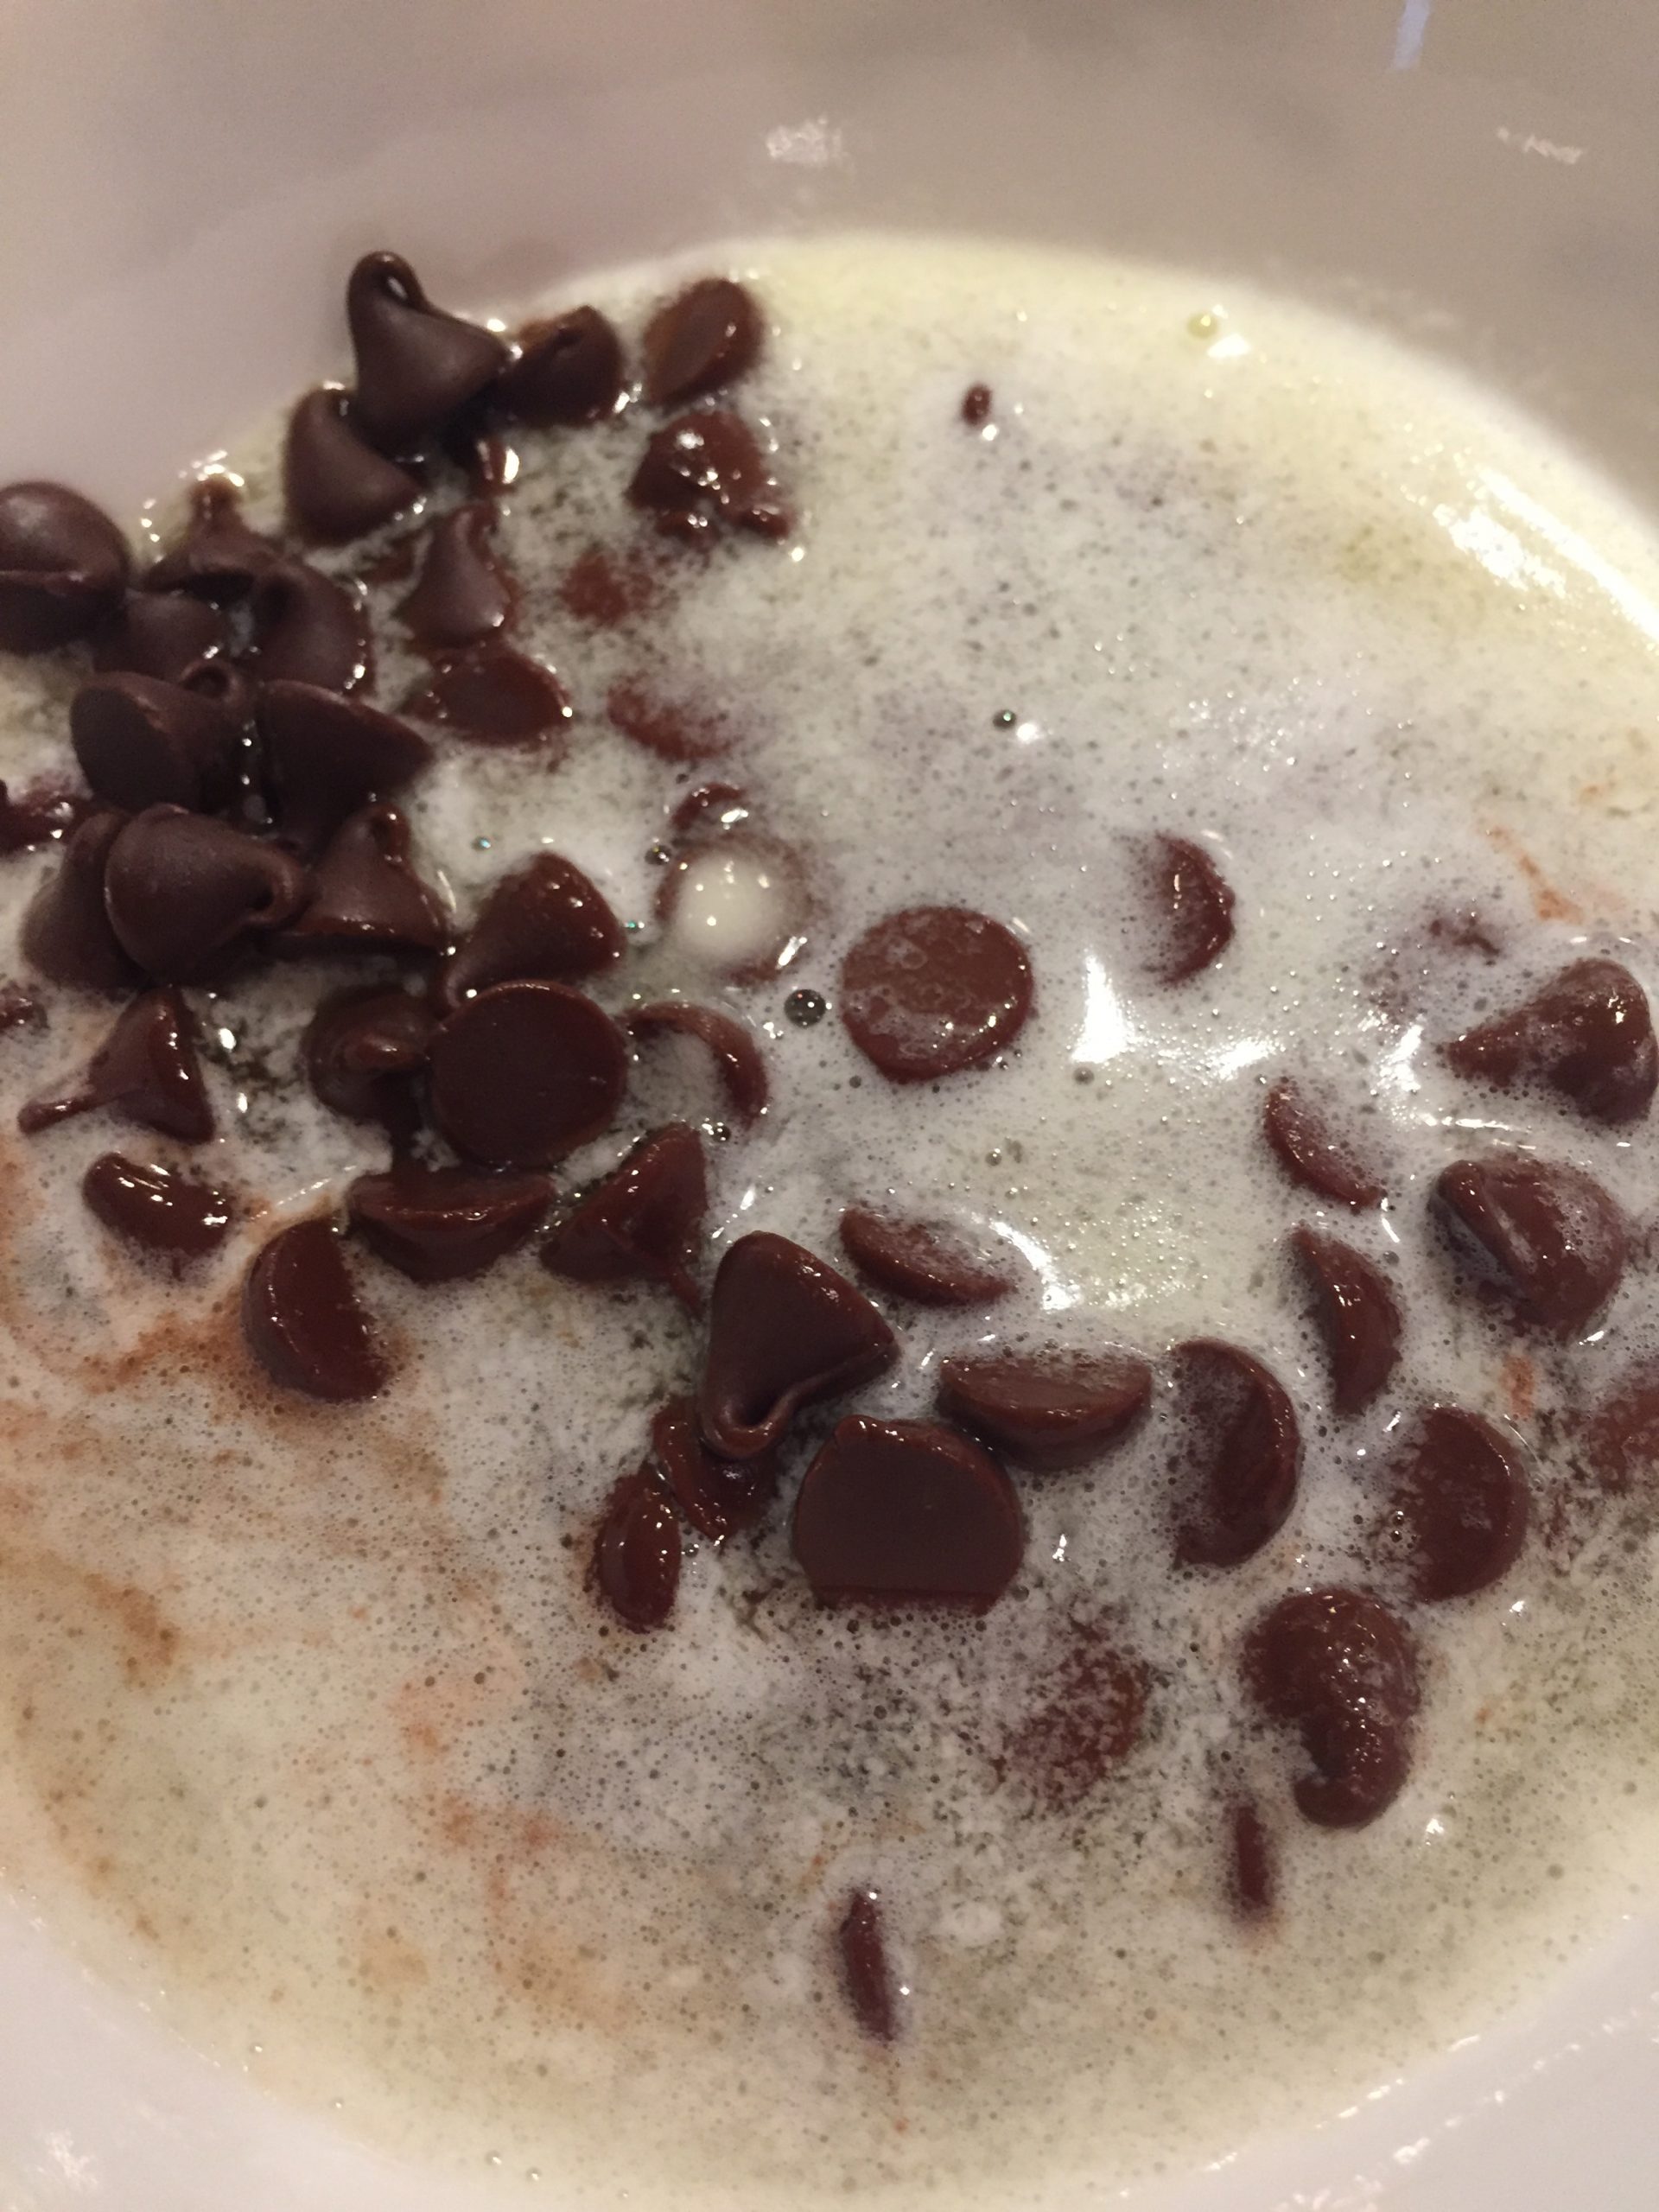 Liquified butter and chocolate